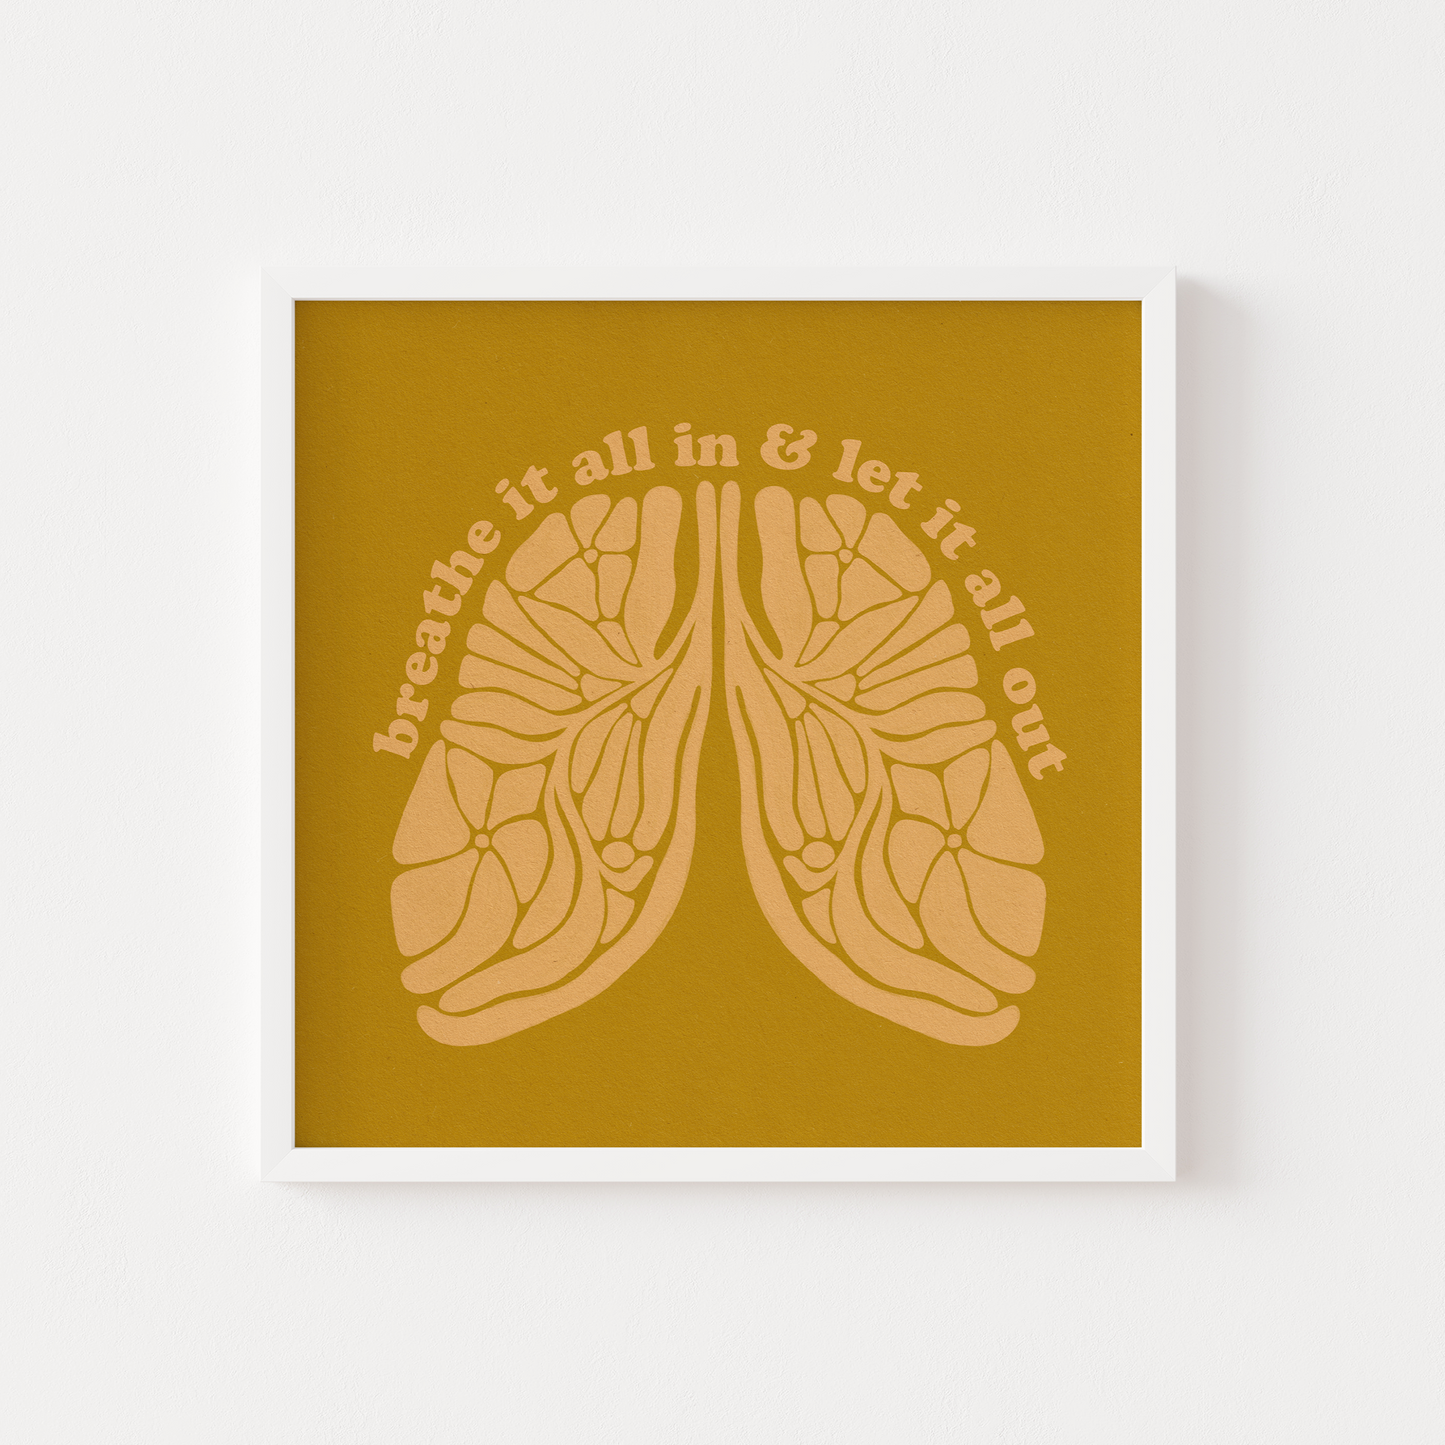 Breathe It All In & Let It All Out - Print